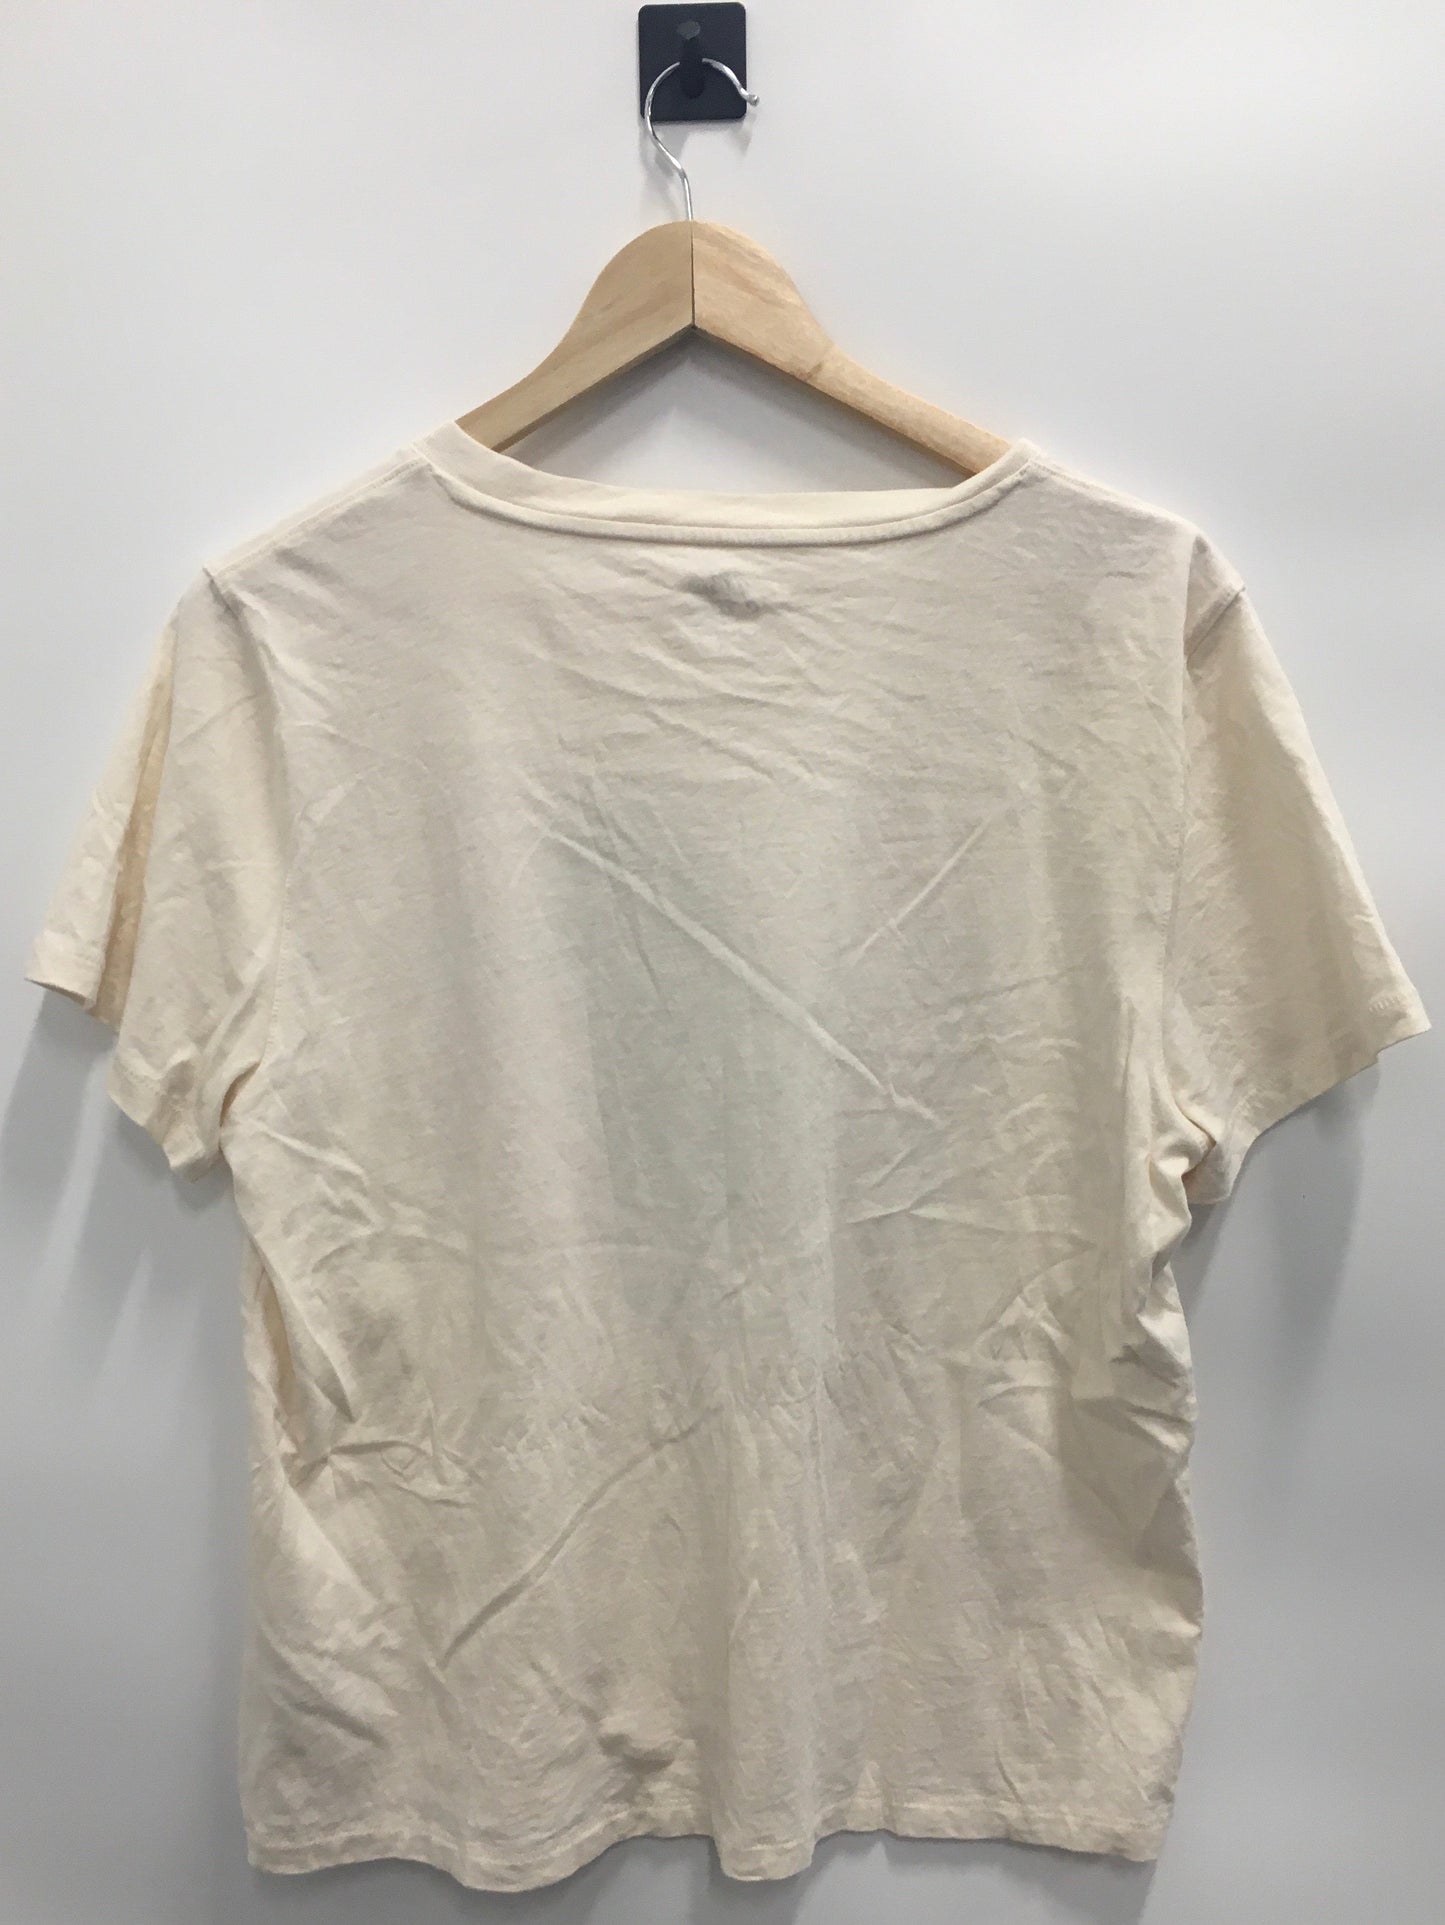 Top Short Sleeve By J Crew  Size: L